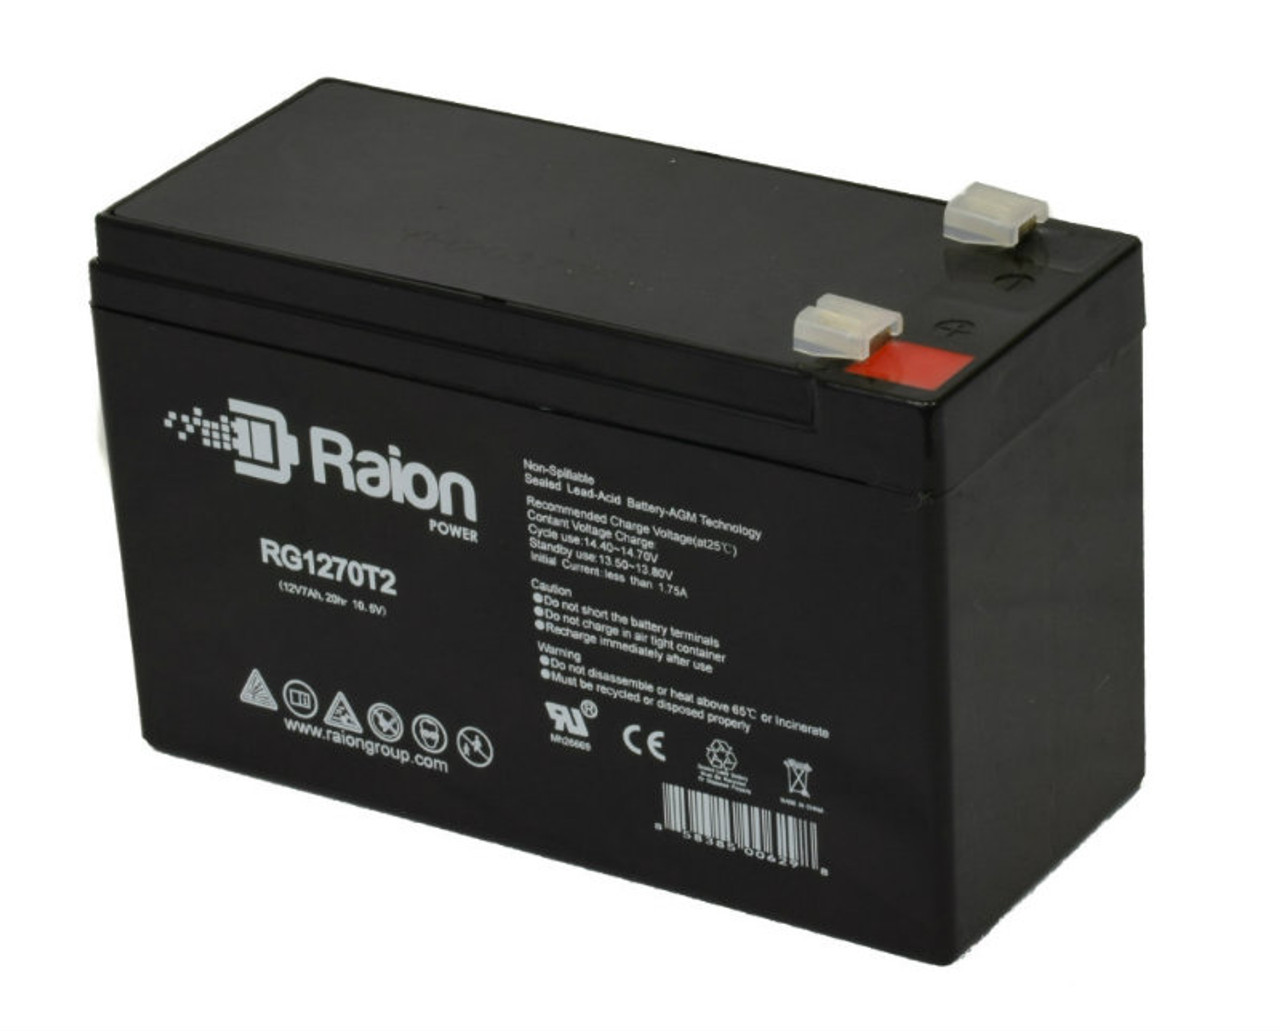 Raion Power RG1270T2 12V 7Ah Rechargeable Battery for Ultracell UL7-12